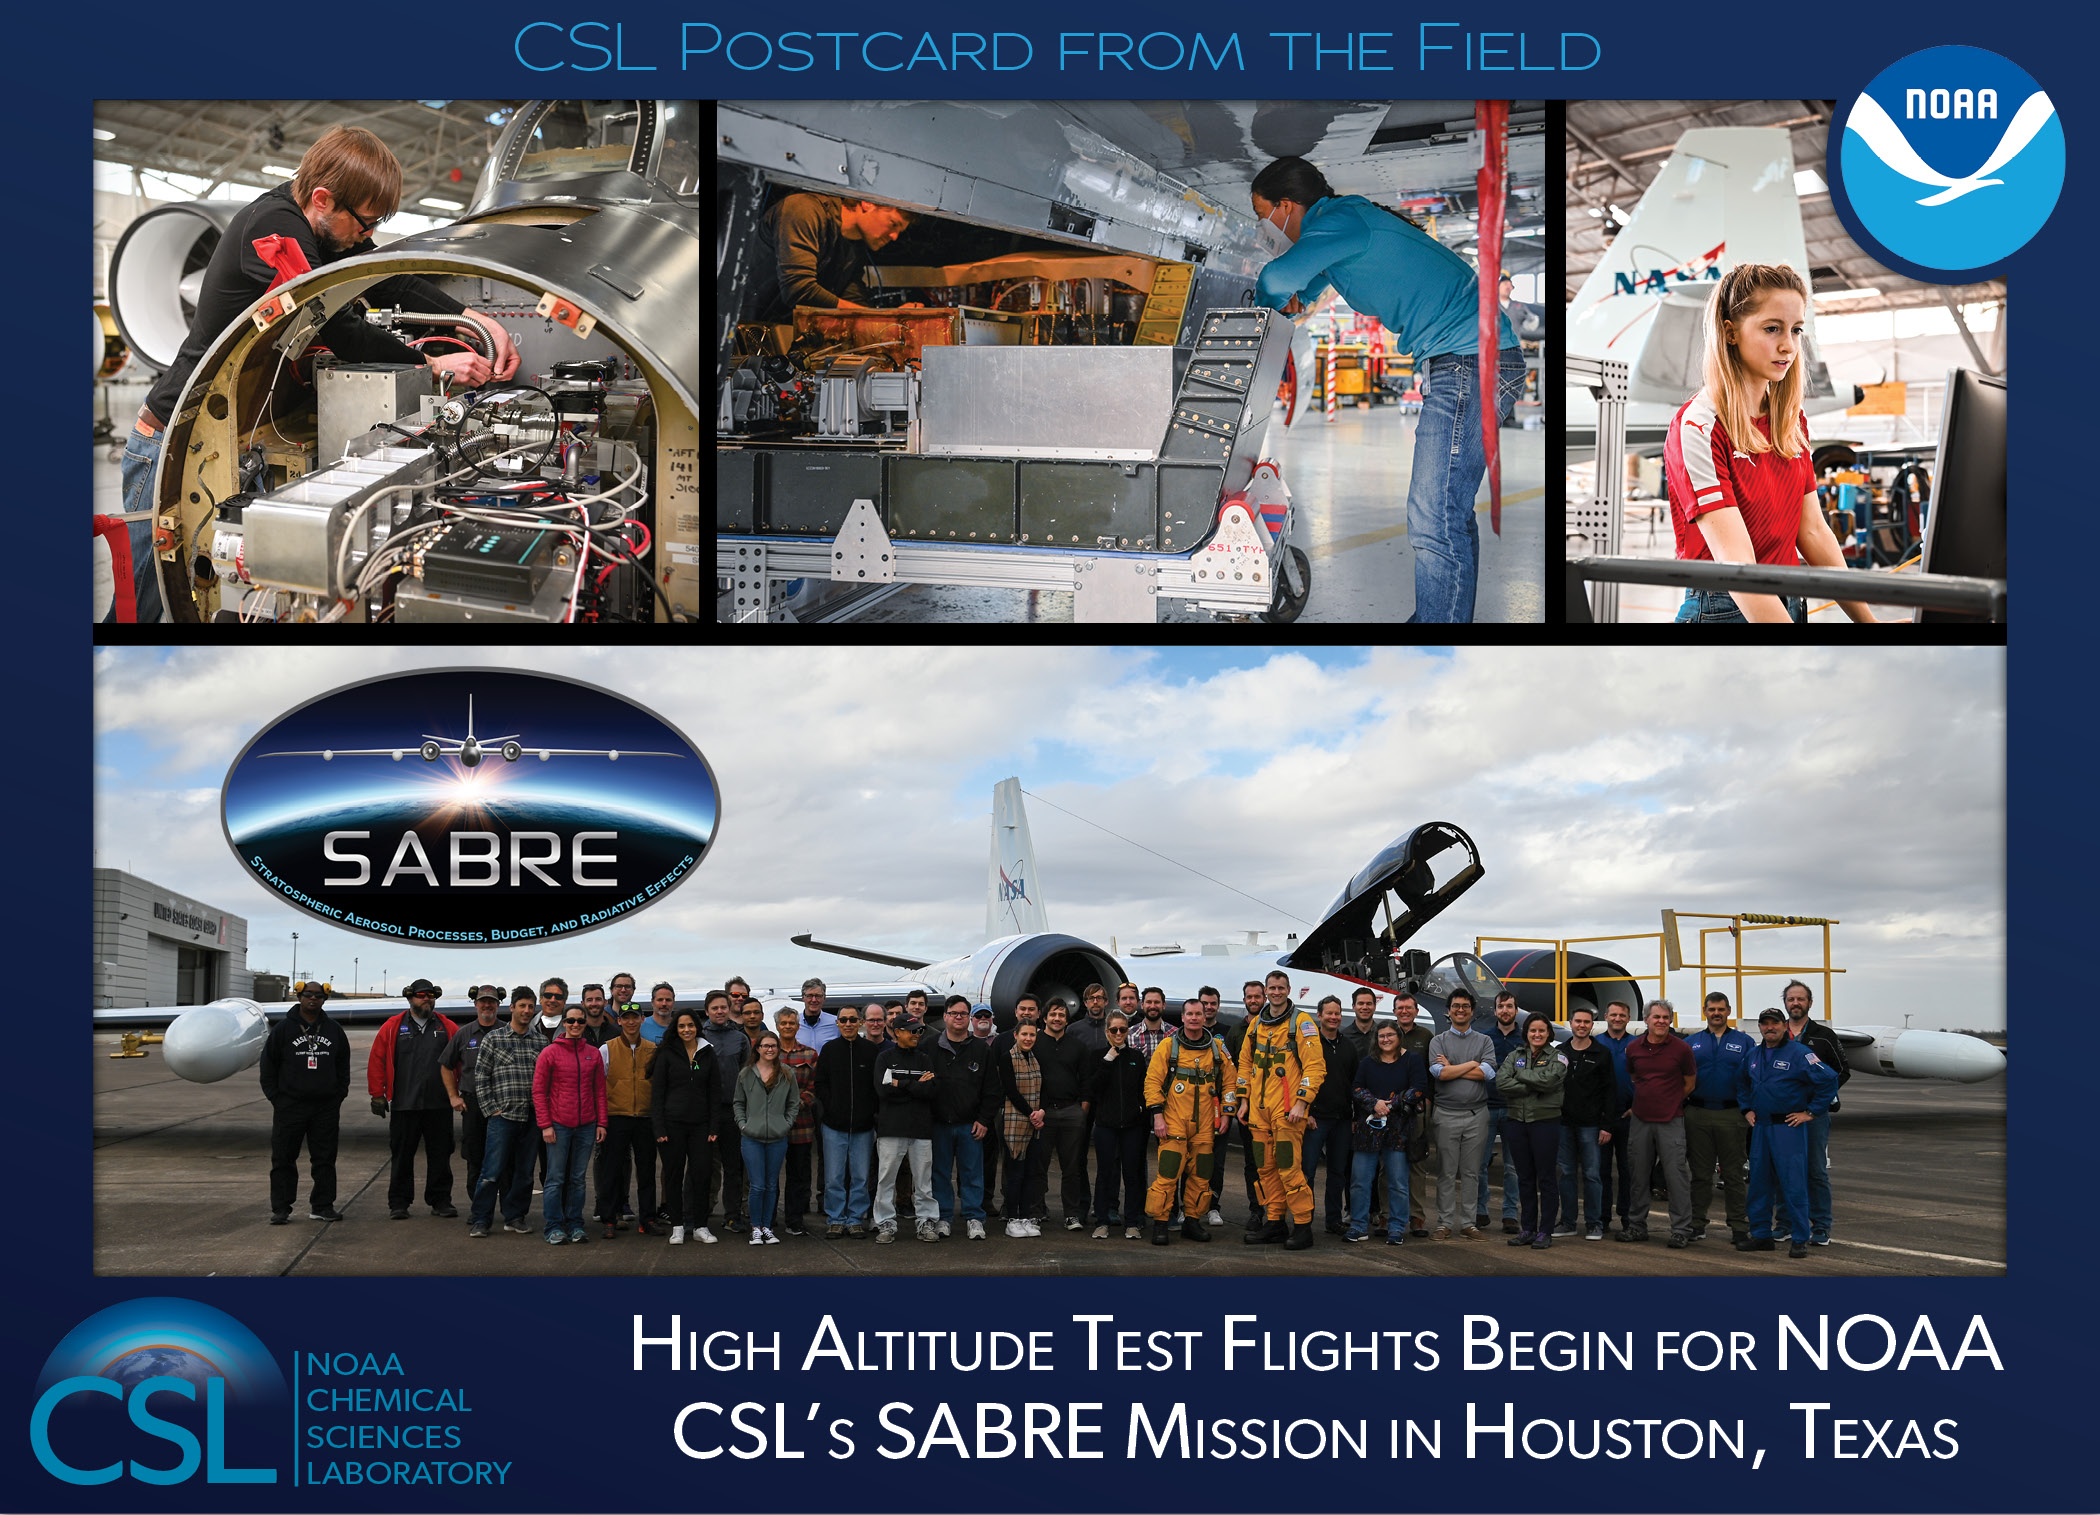 SABRE 2022 Postcard from the Field